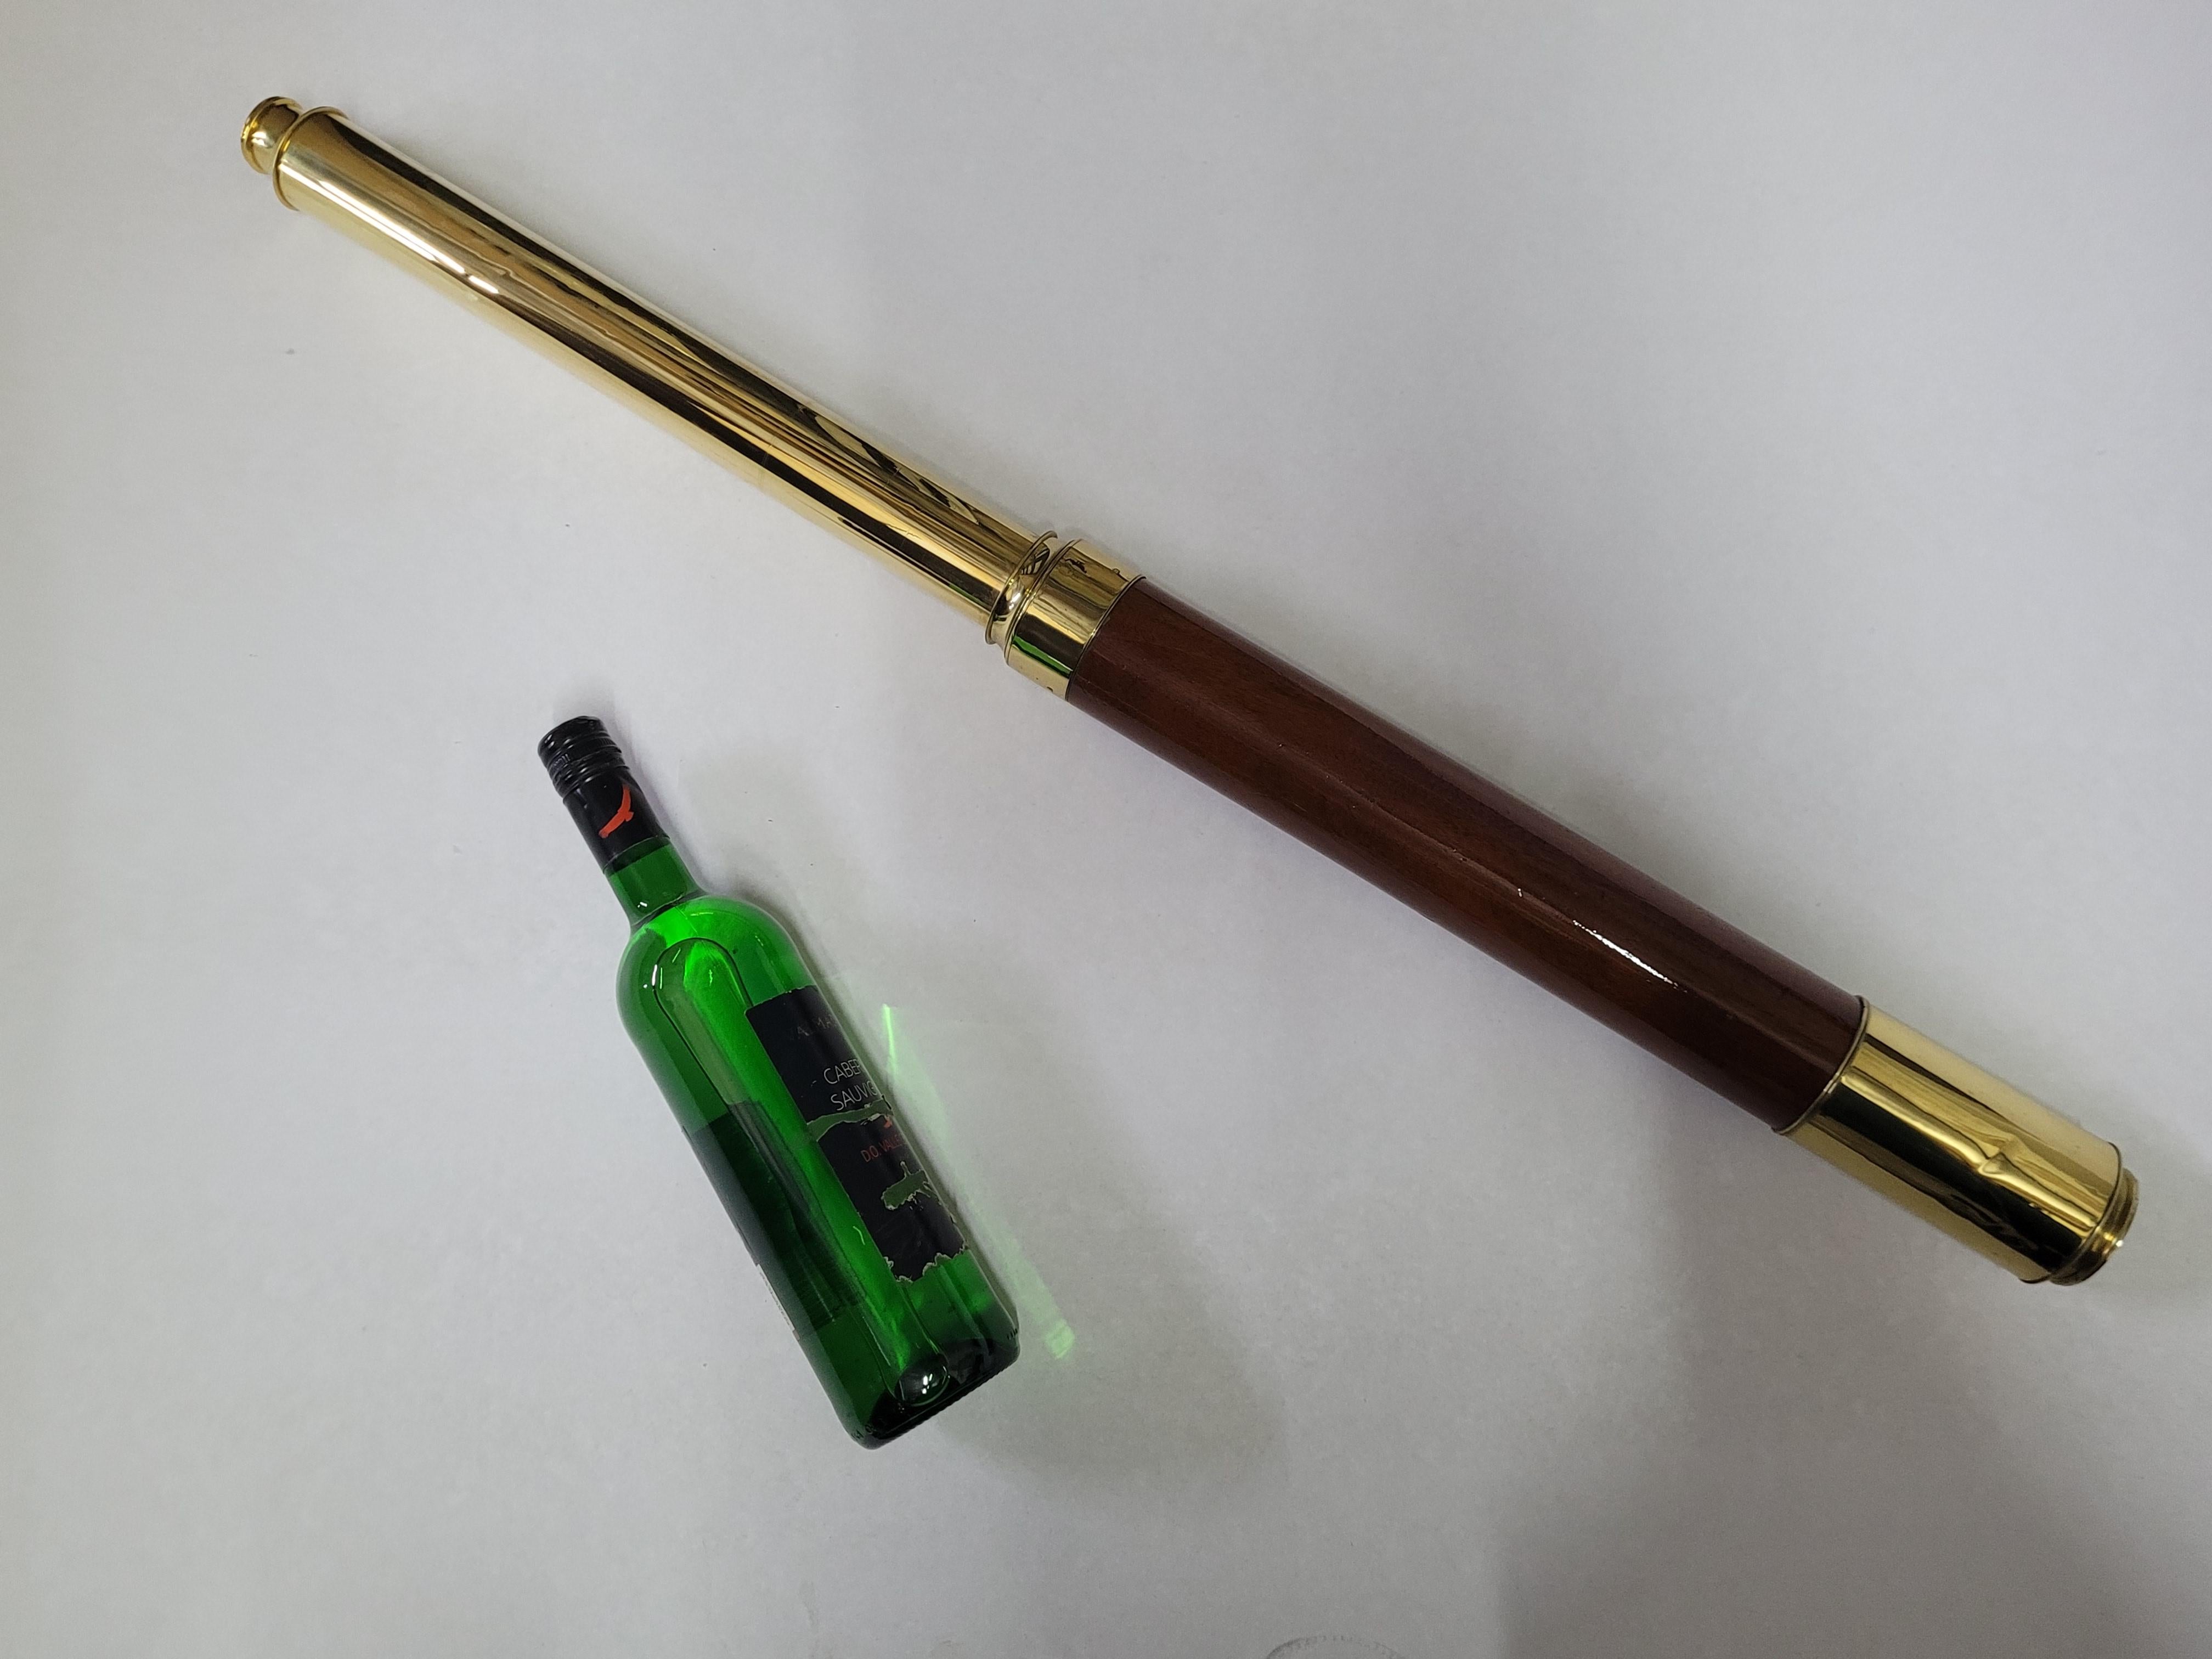 Ships spyglass telescope appropriate for use on a yacht, ship, or anywhere with a view. This has been meticulously polished and lacquered. We just restored a great collection of these. This fine instrument has a single draw barrel of mahogany. The